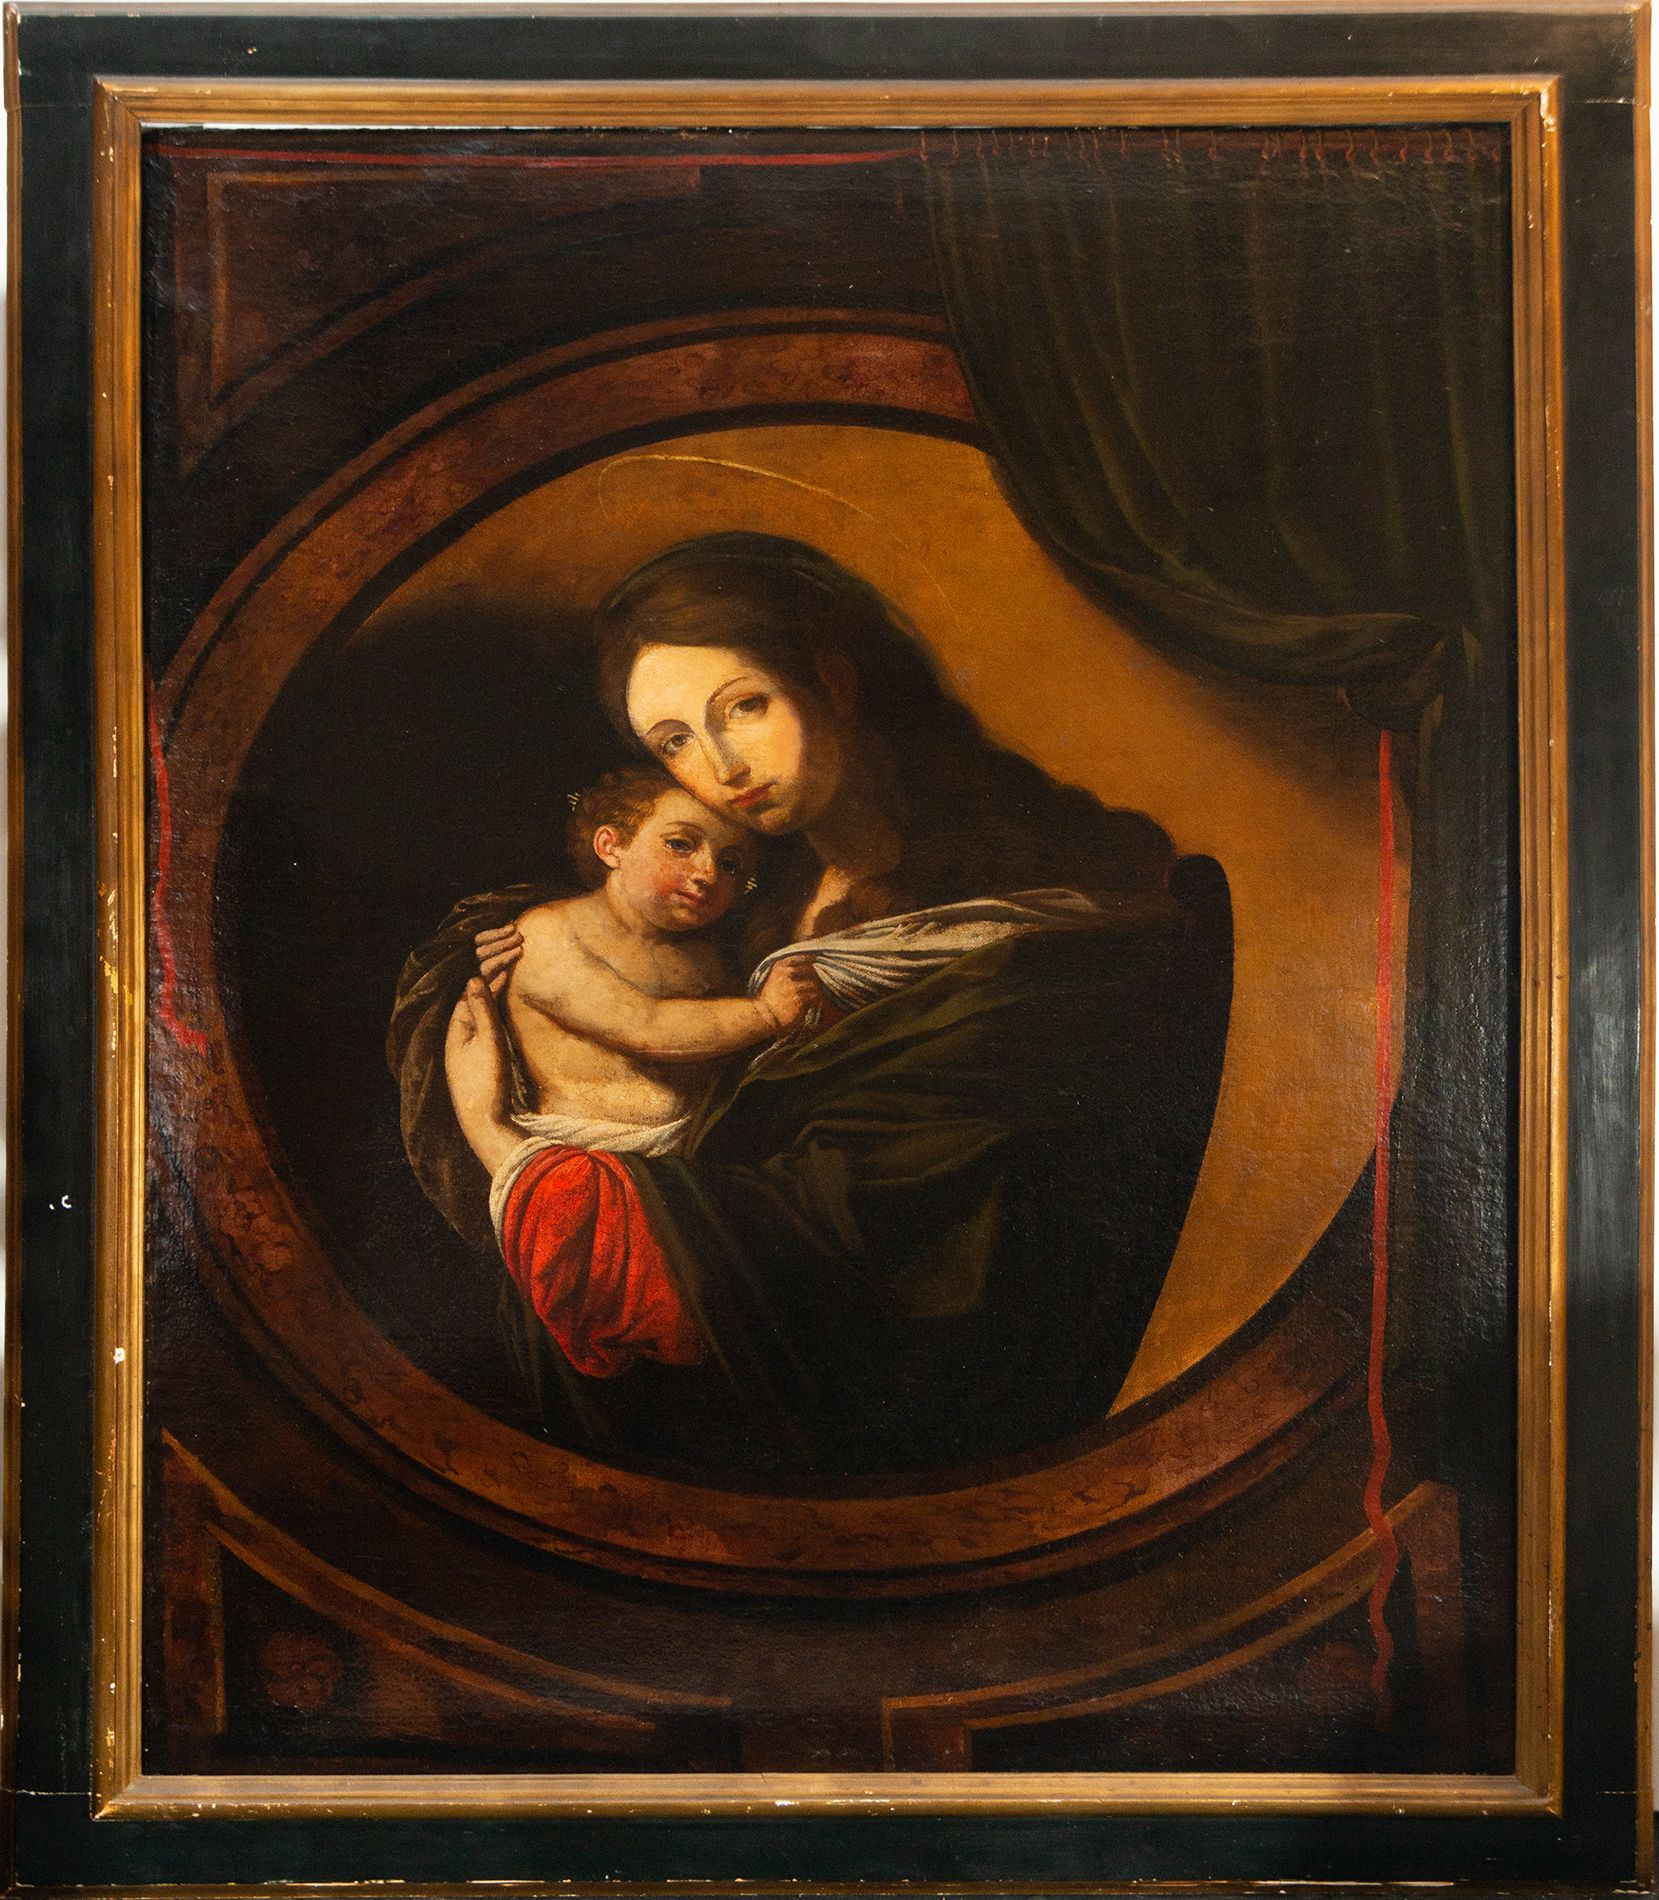 Virgin with Child in Arms, Italian school of the 17th century 抱着孩子的圣母，17世纪的意大利学校